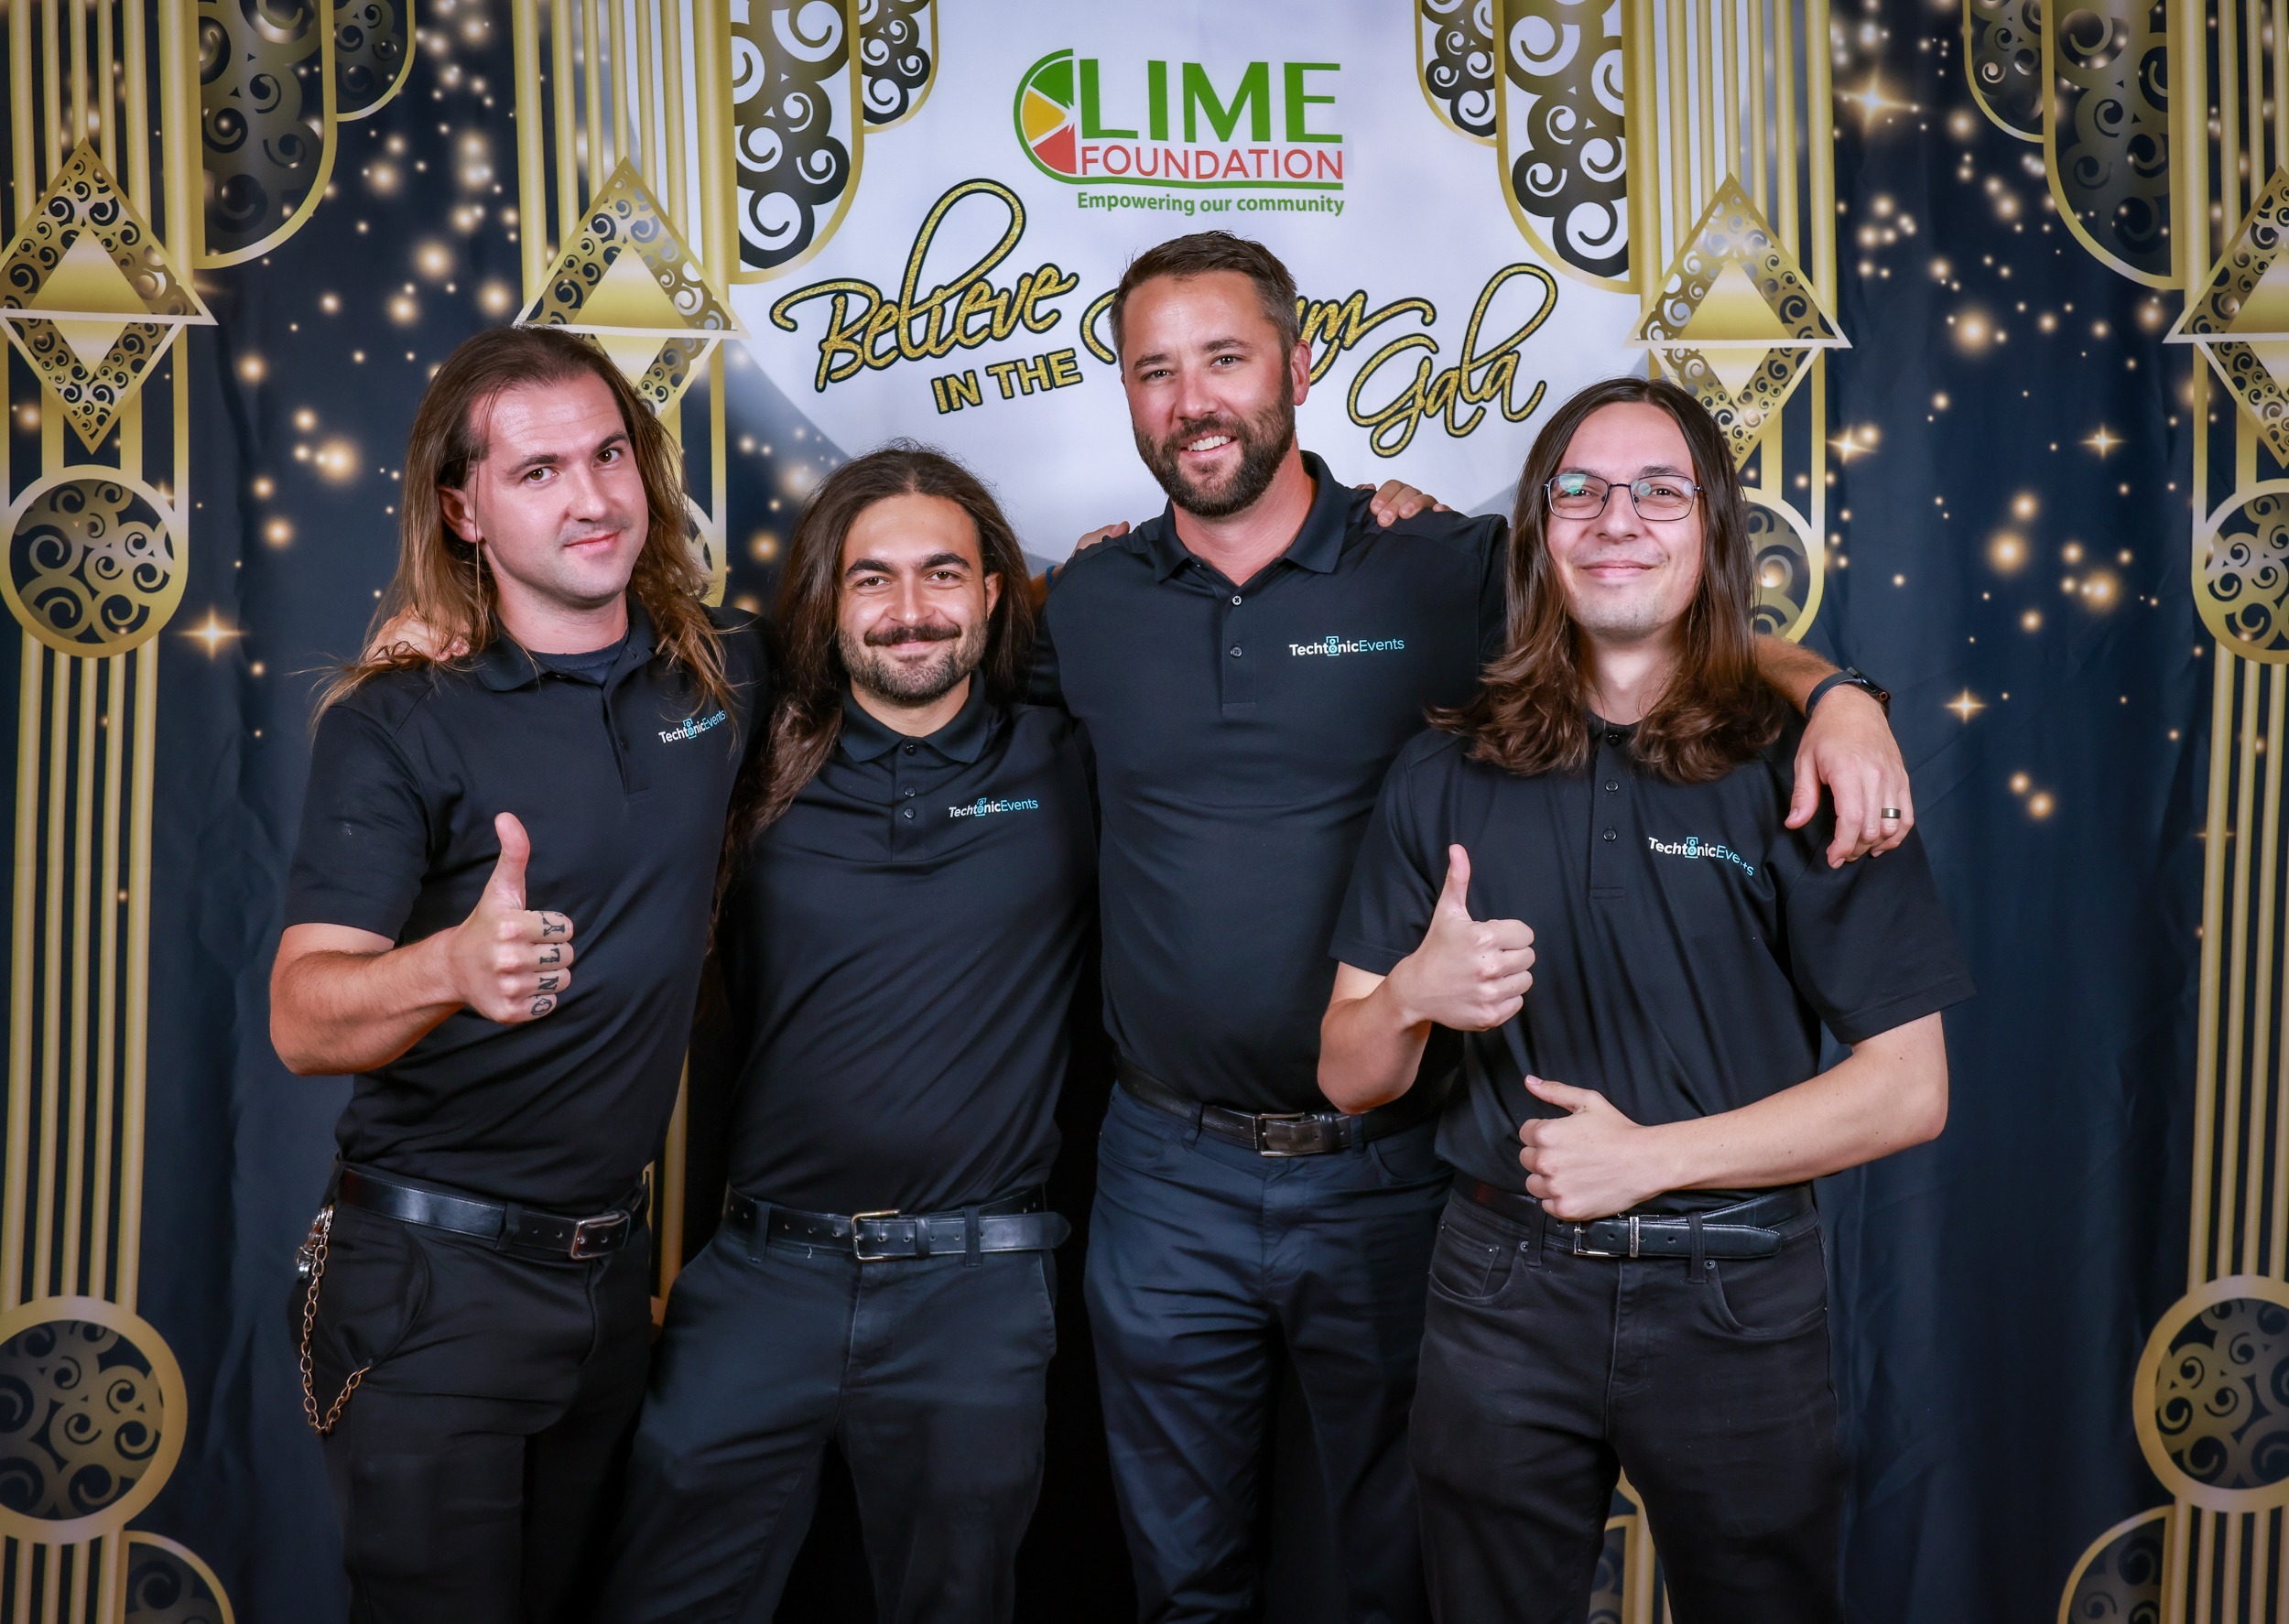 Four men in black shirts posing for a picture at The LIME Foundation of Santa Rosa.